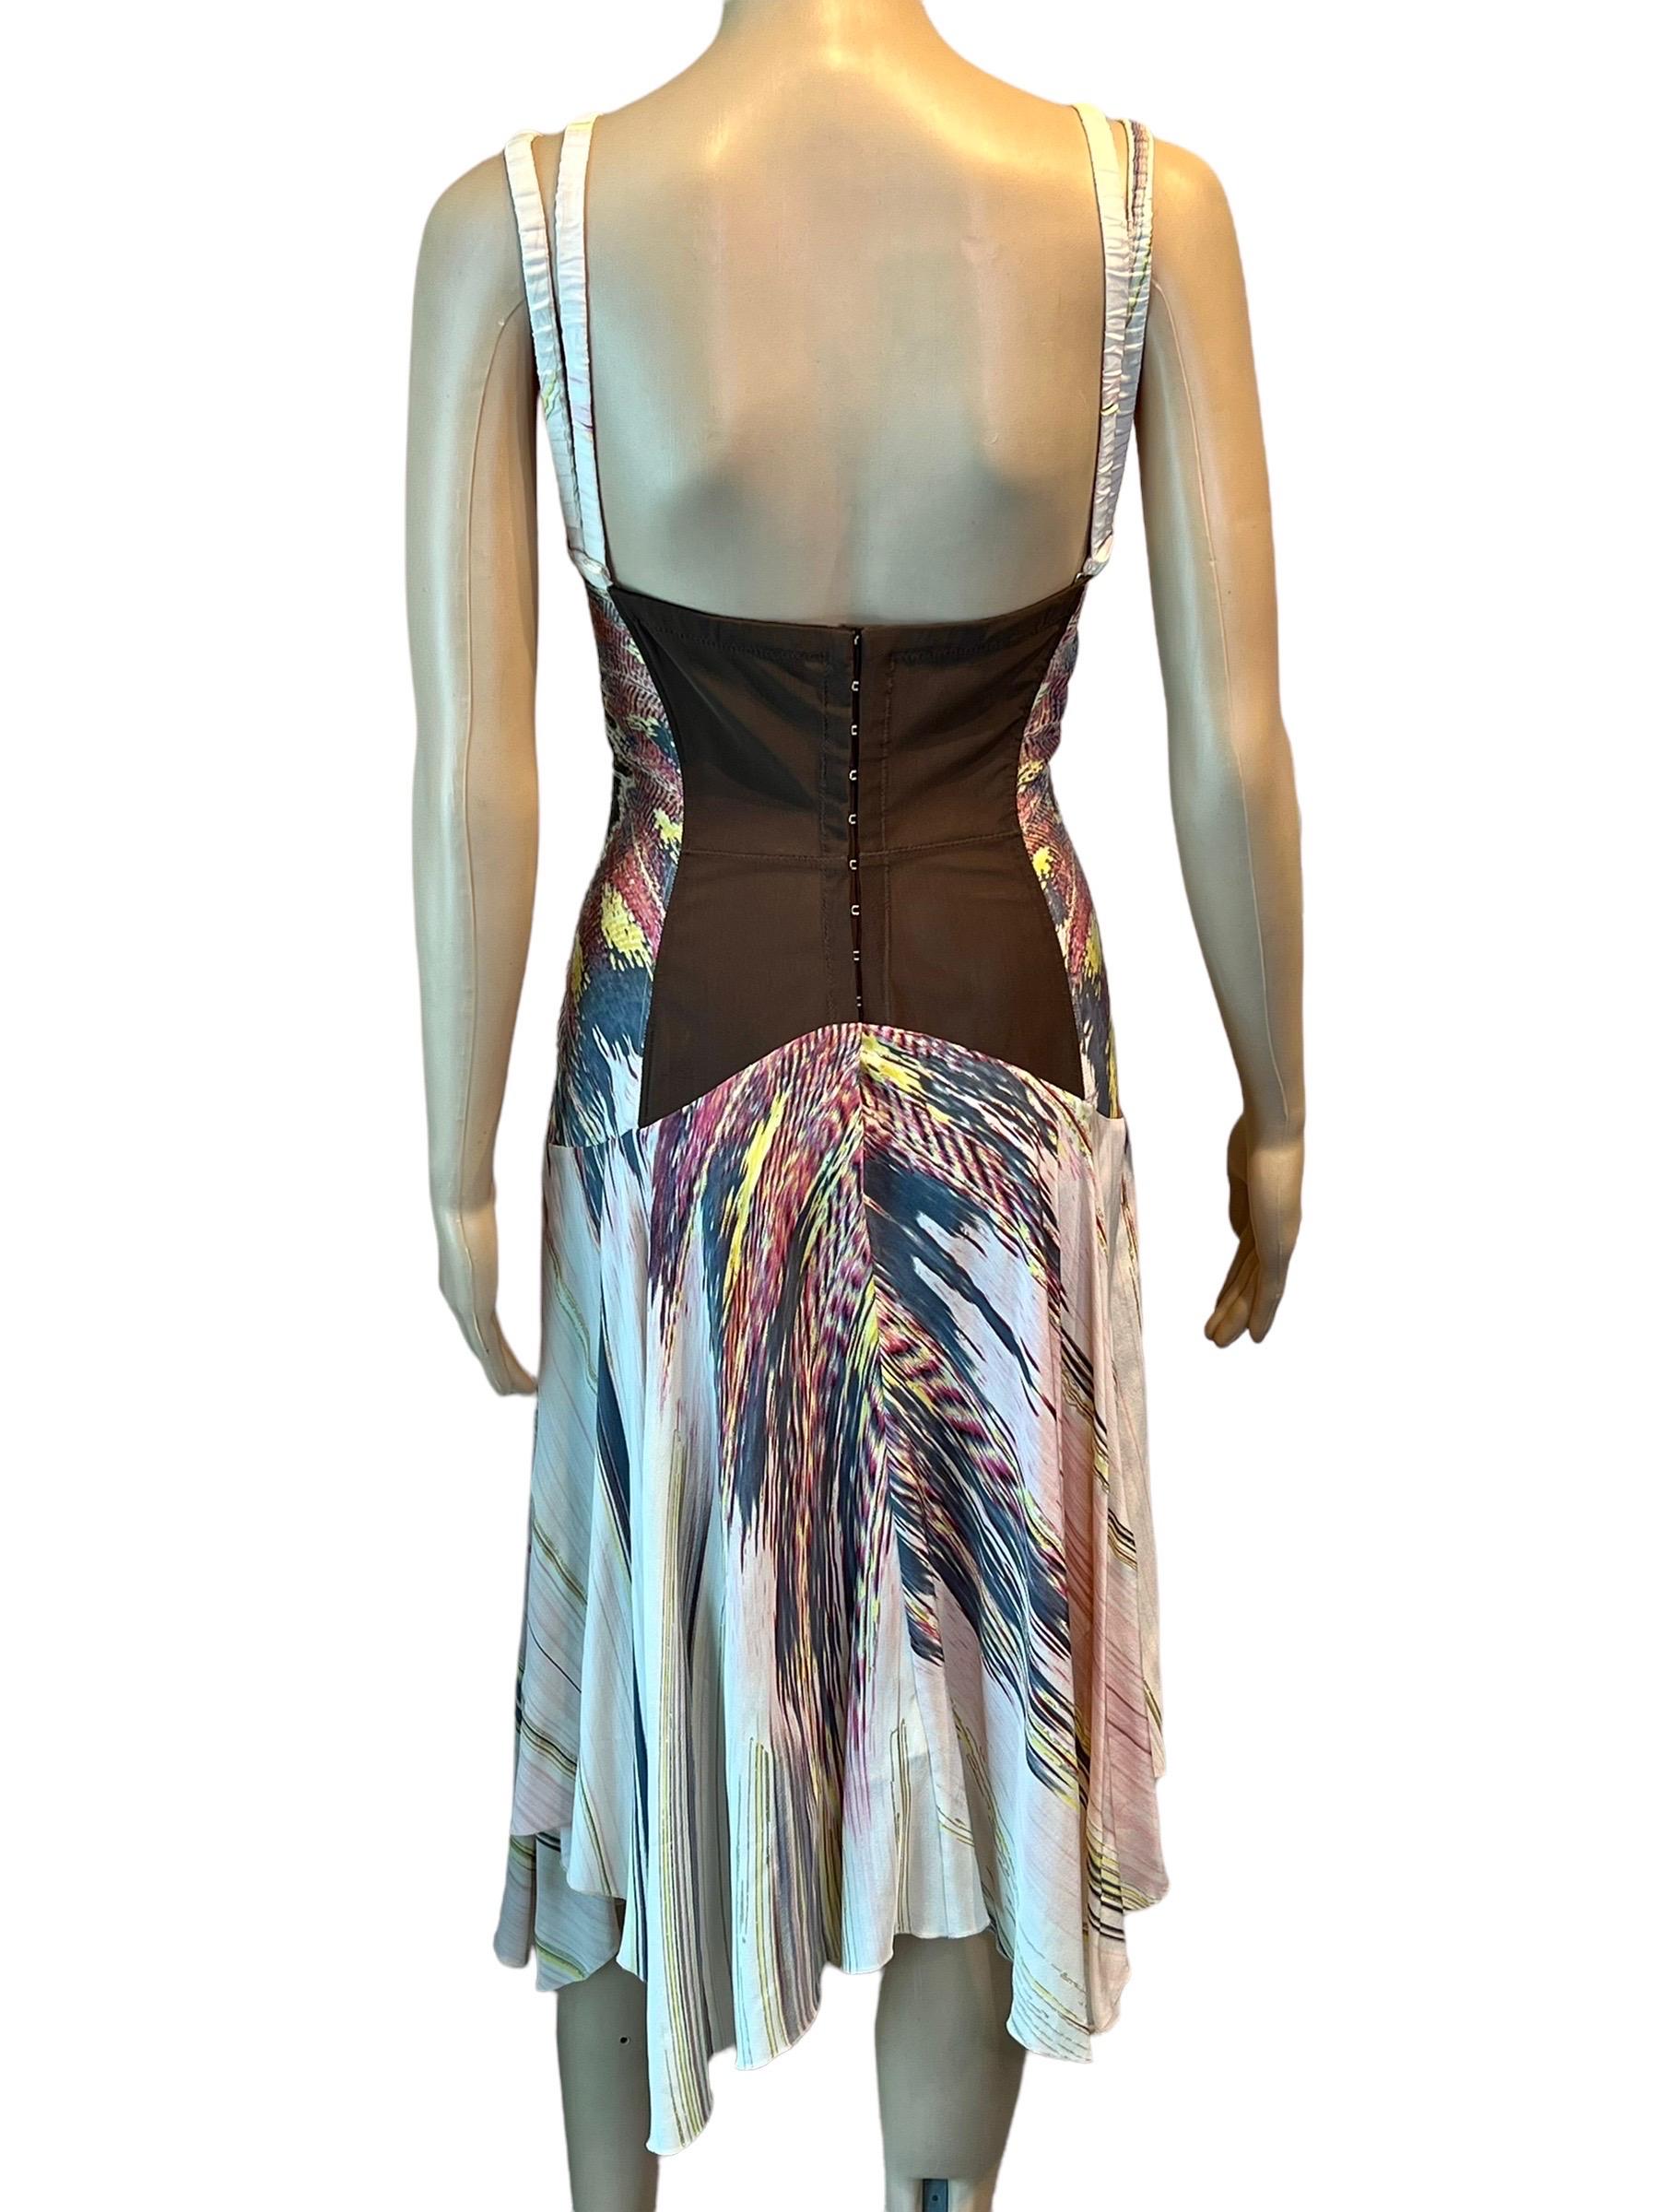 Roberto Cavalli S/S 2004 Bustier Corset Plunging Neckline Feather Print Dress In Good Condition For Sale In Naples, FL